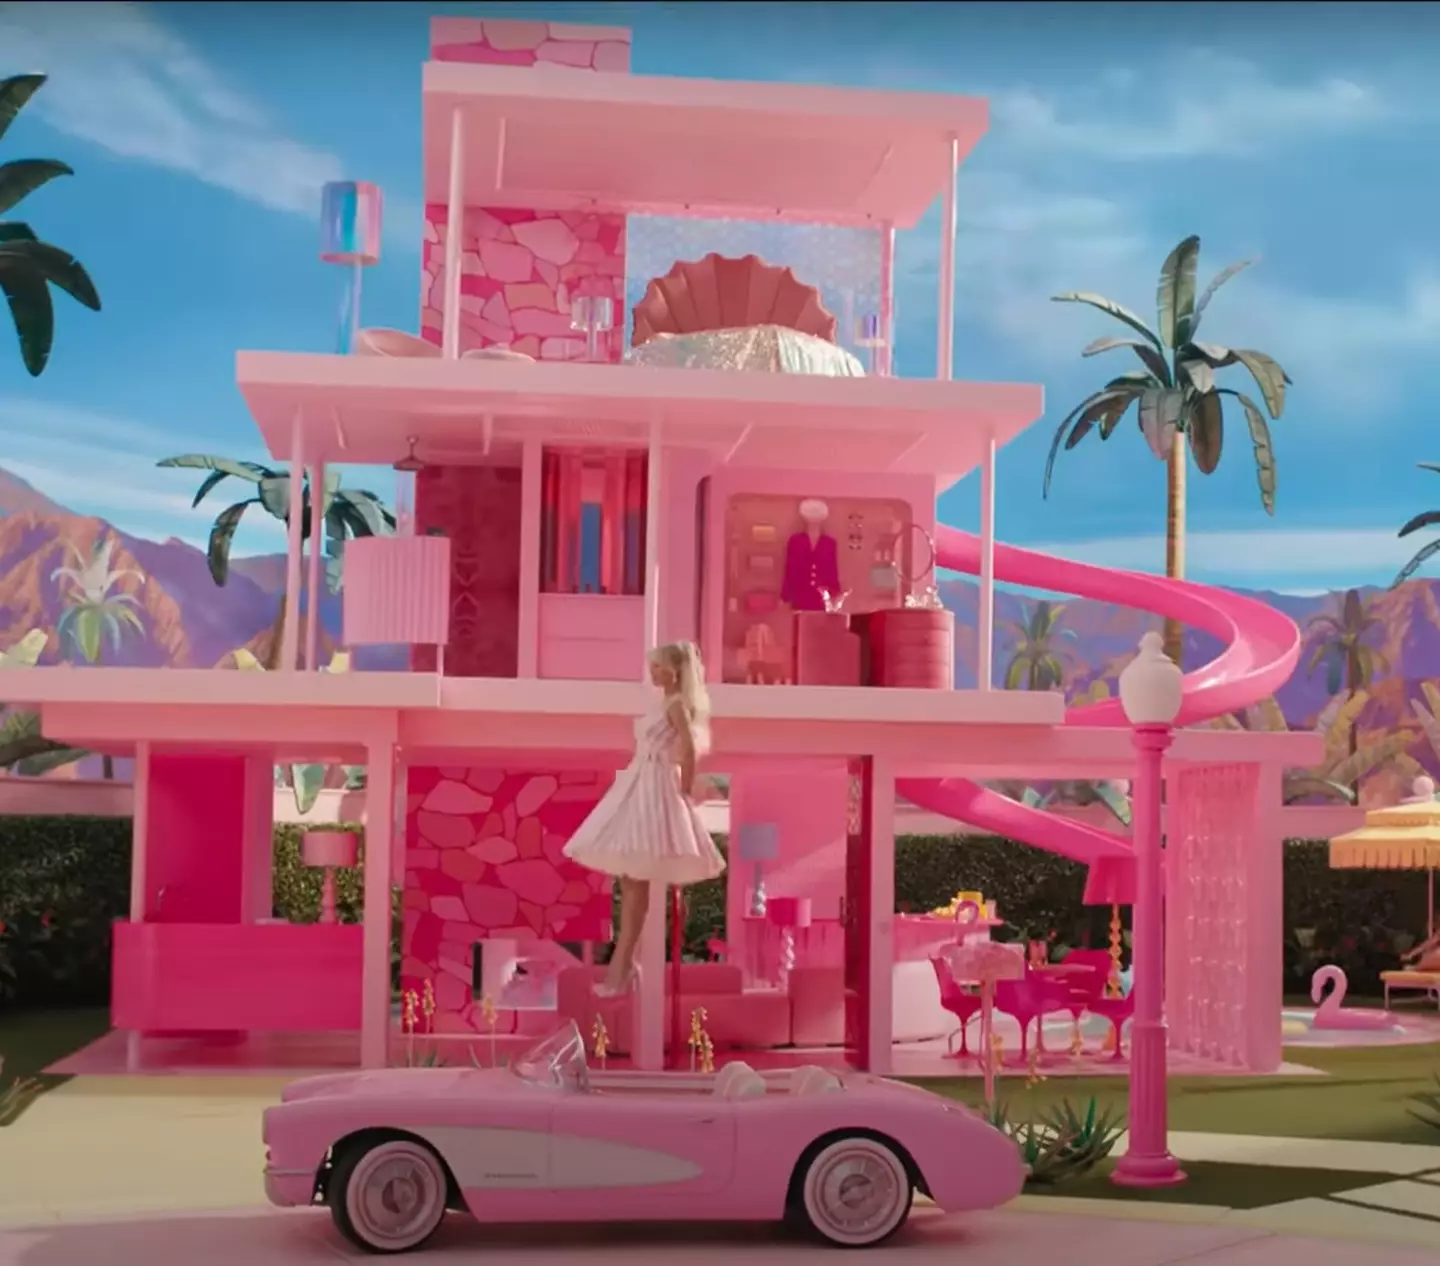 Barbie's house caused an international paint shortage.